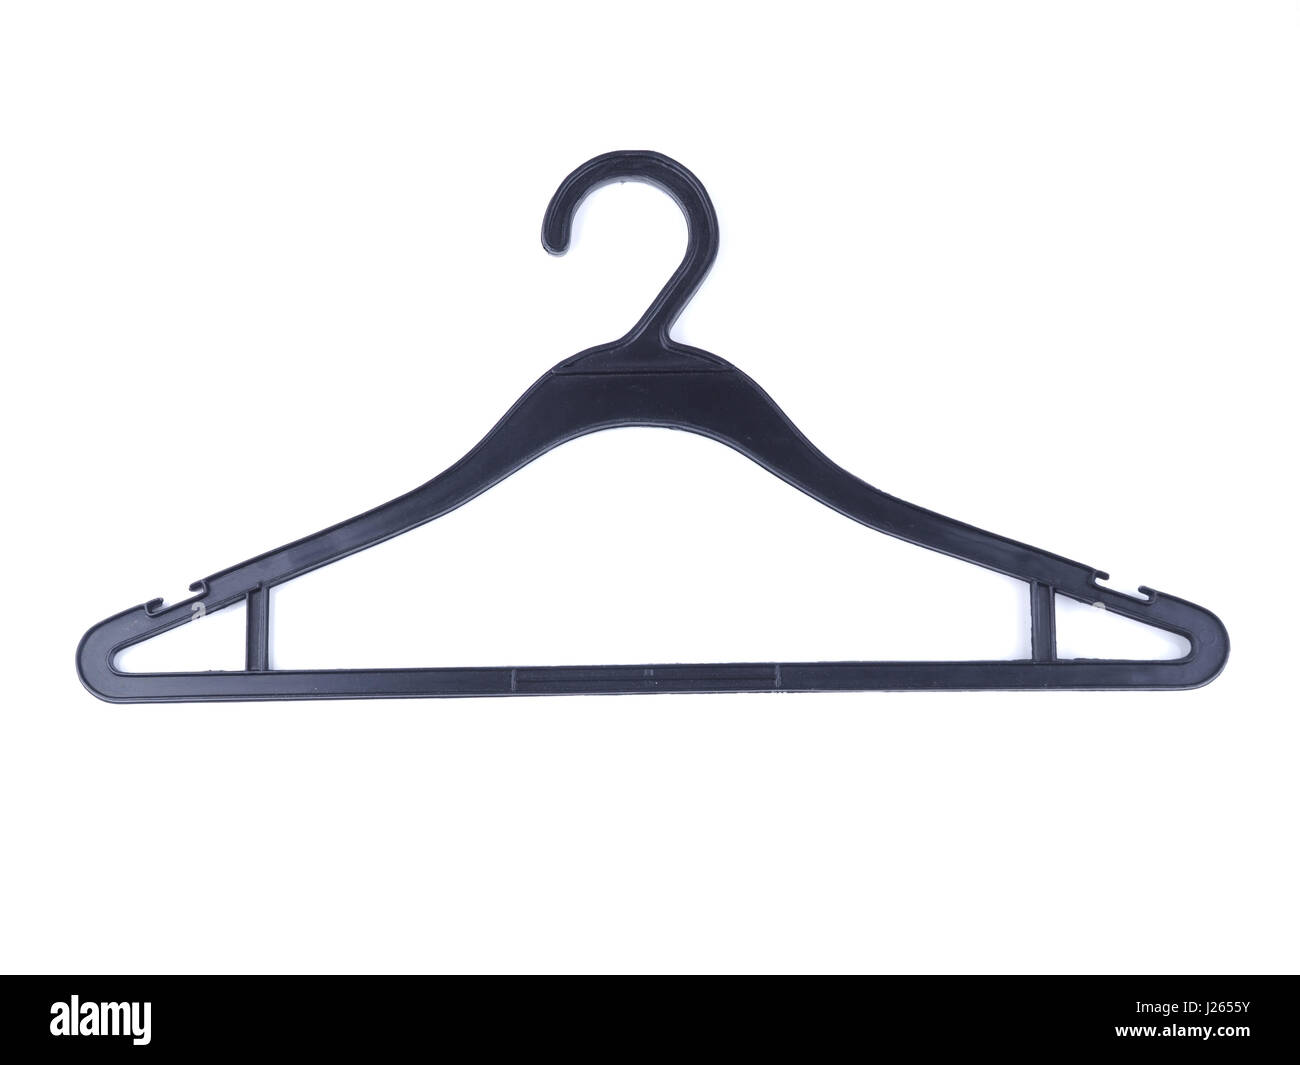 hanger on a white background Stock Photo